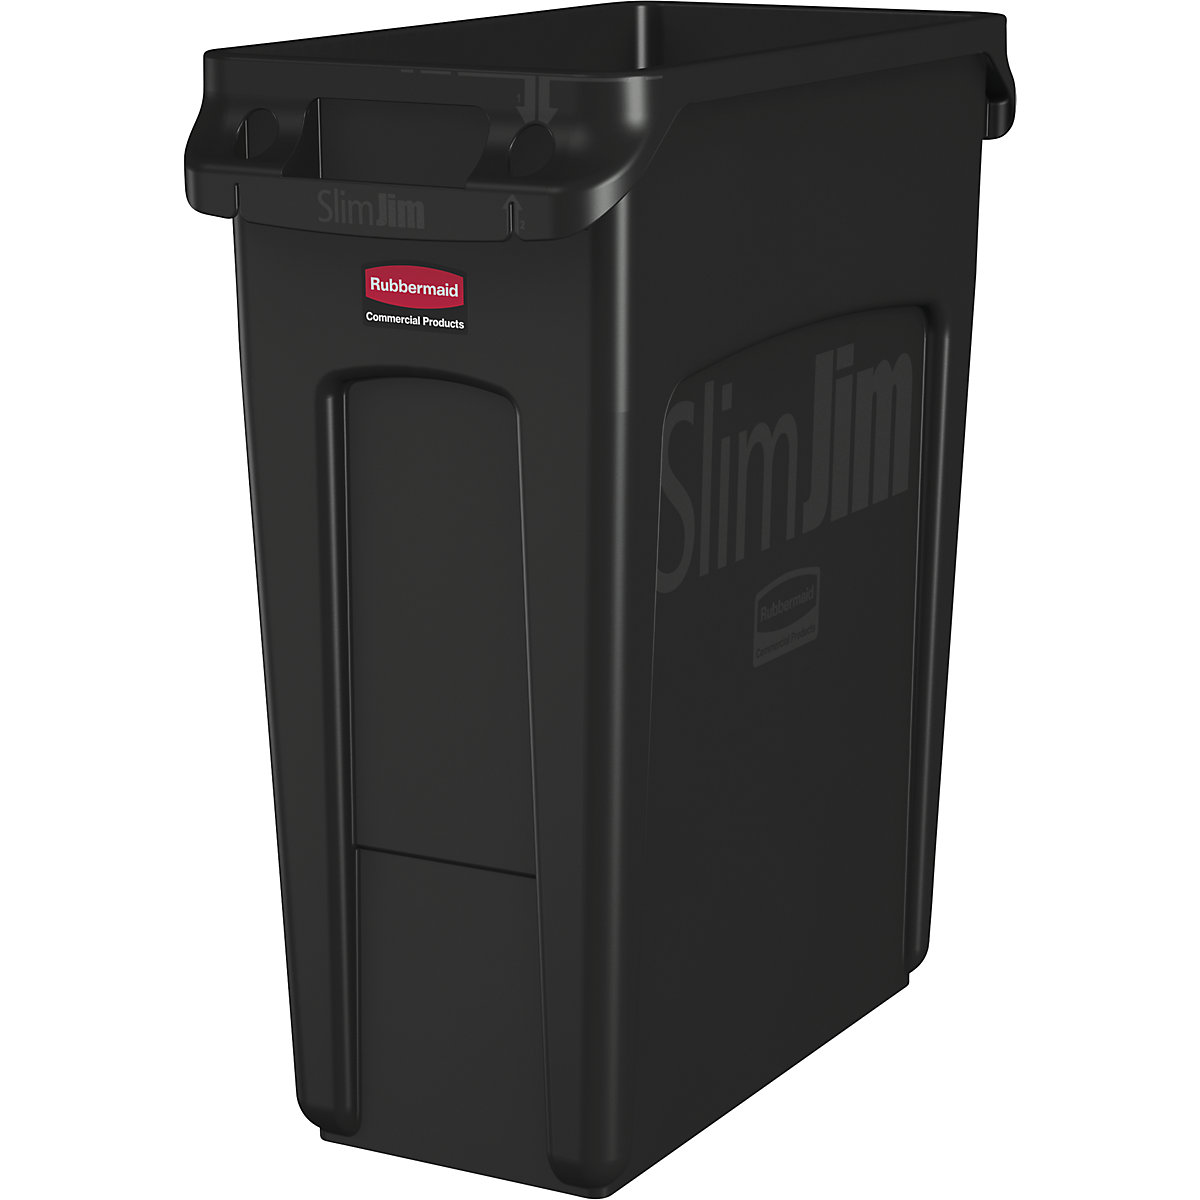 SLIM JIM® recyclable waste collector/waste bin – Rubbermaid, capacity 87 l, with ventilation ducts, black, 3+ items-16